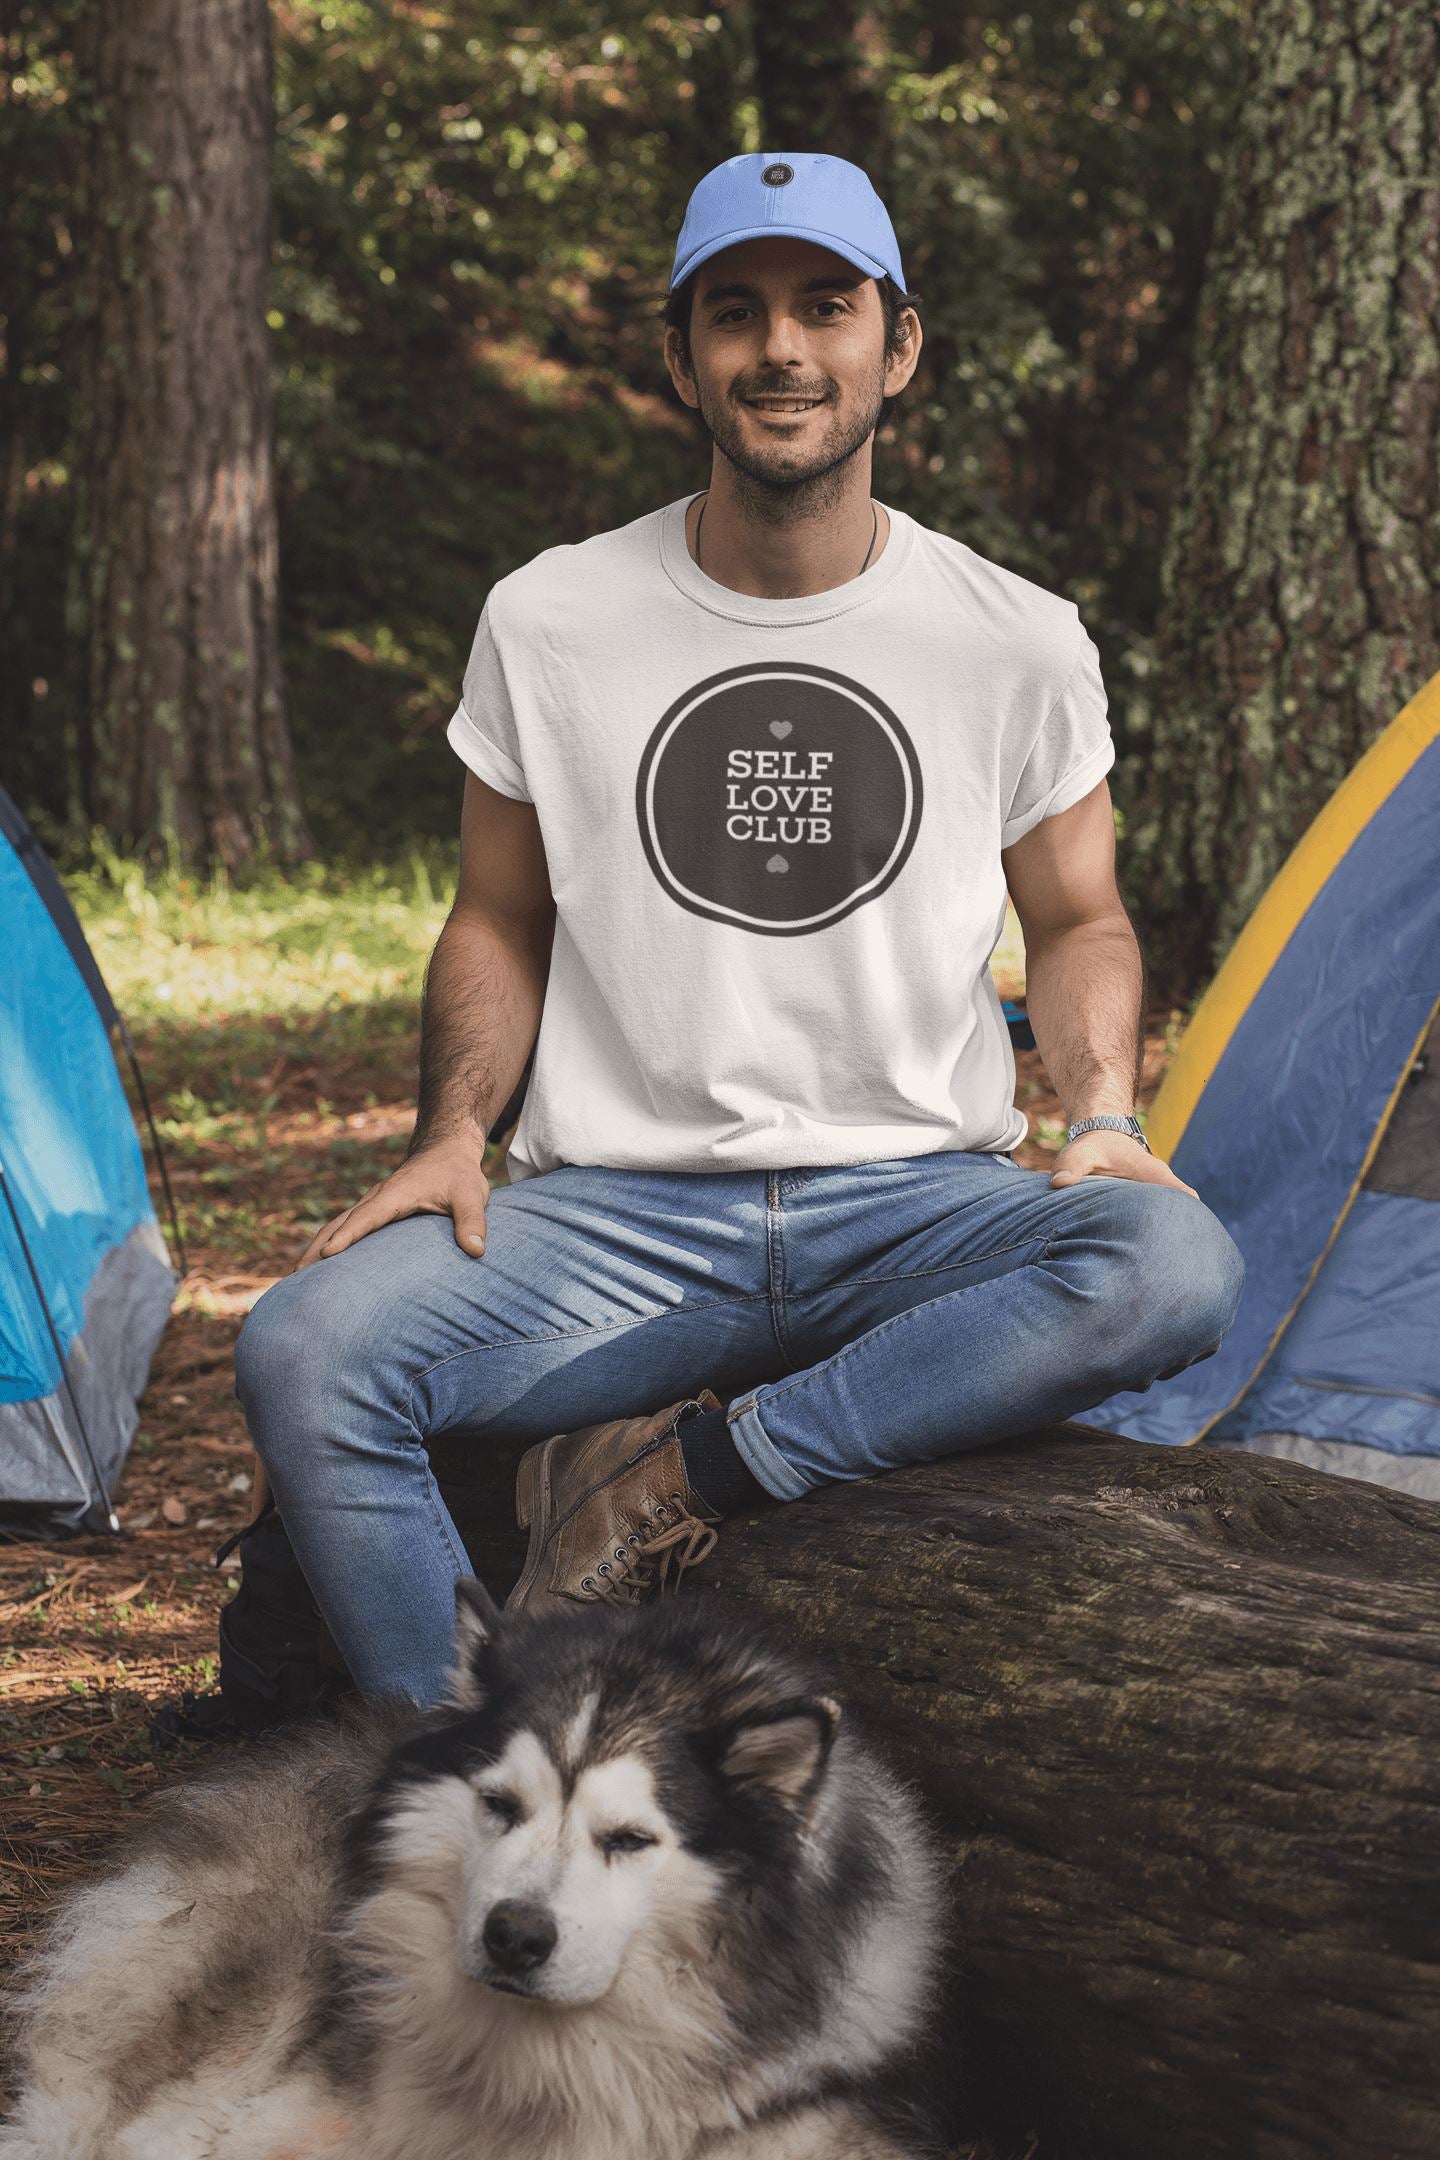 Self Love Club Special T shirt for Mental Health Supporters | Premium Design | Catch My Drift India - Catch My Drift India  clothing, female, general, gym, made in india, mental health, shirt